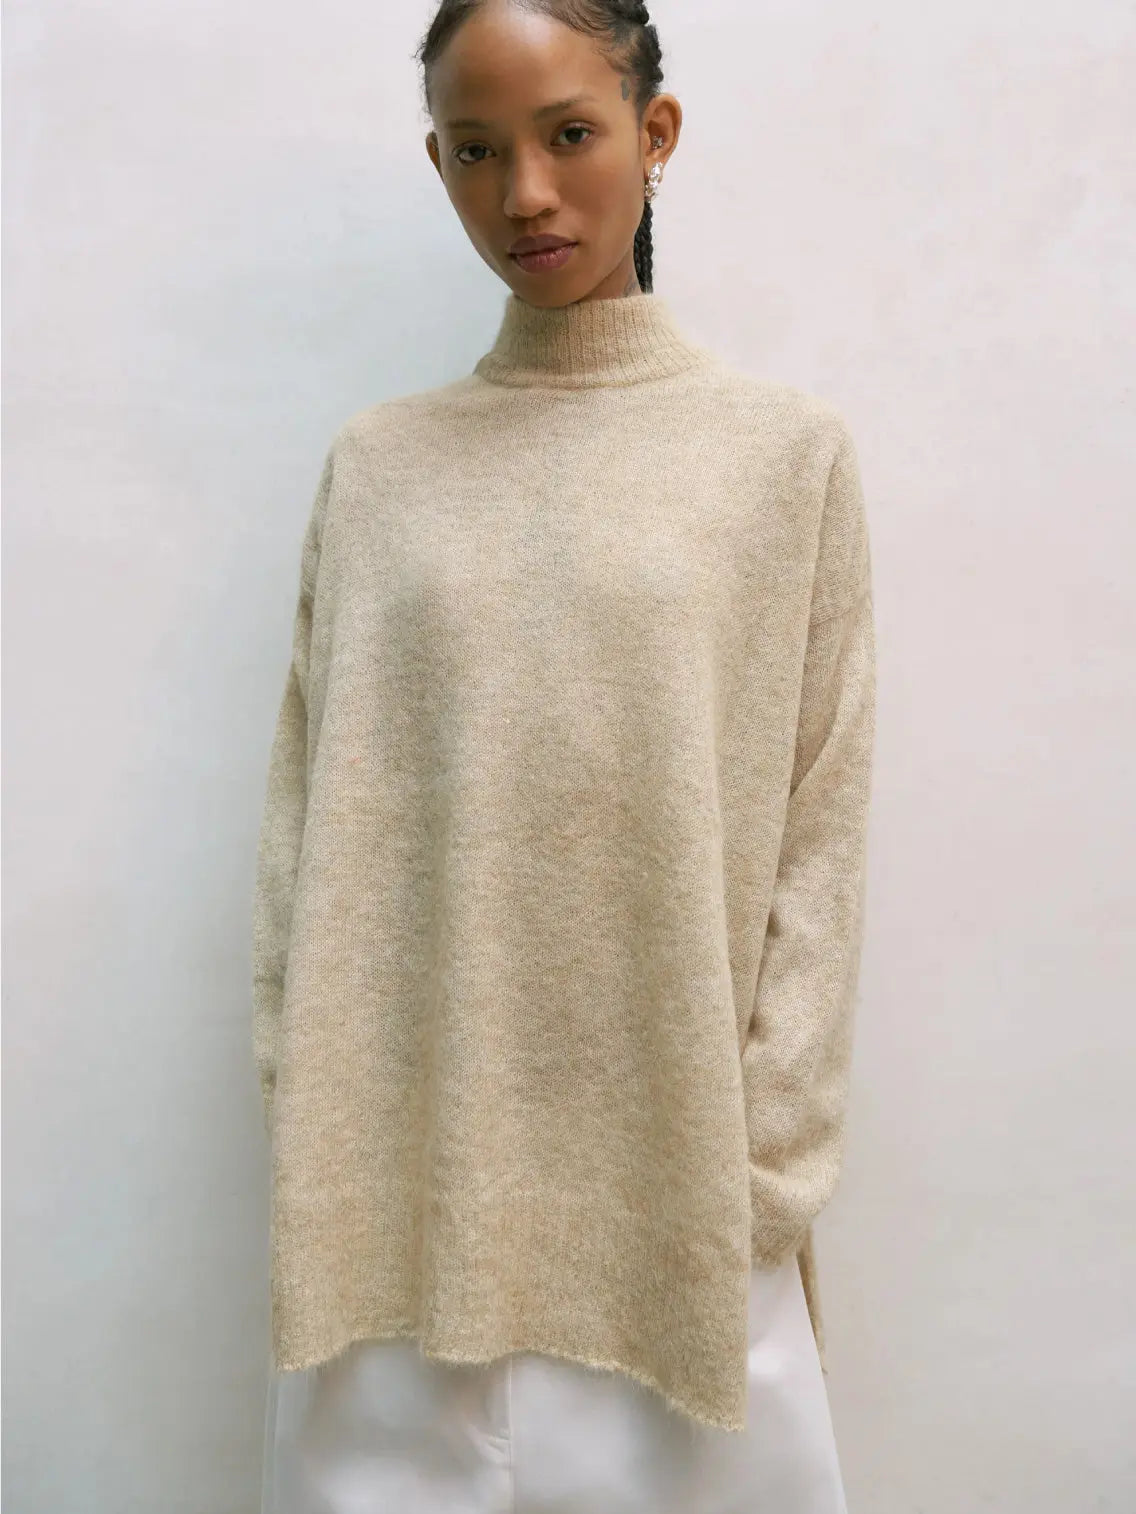 A beige, long-sleeved, knitted Suri Turtleneck Sweater Avene from Cordera. The sweater has a loose, relaxed fit and appears to be made of soft, cozy material. It is laid flat against a plain white background.